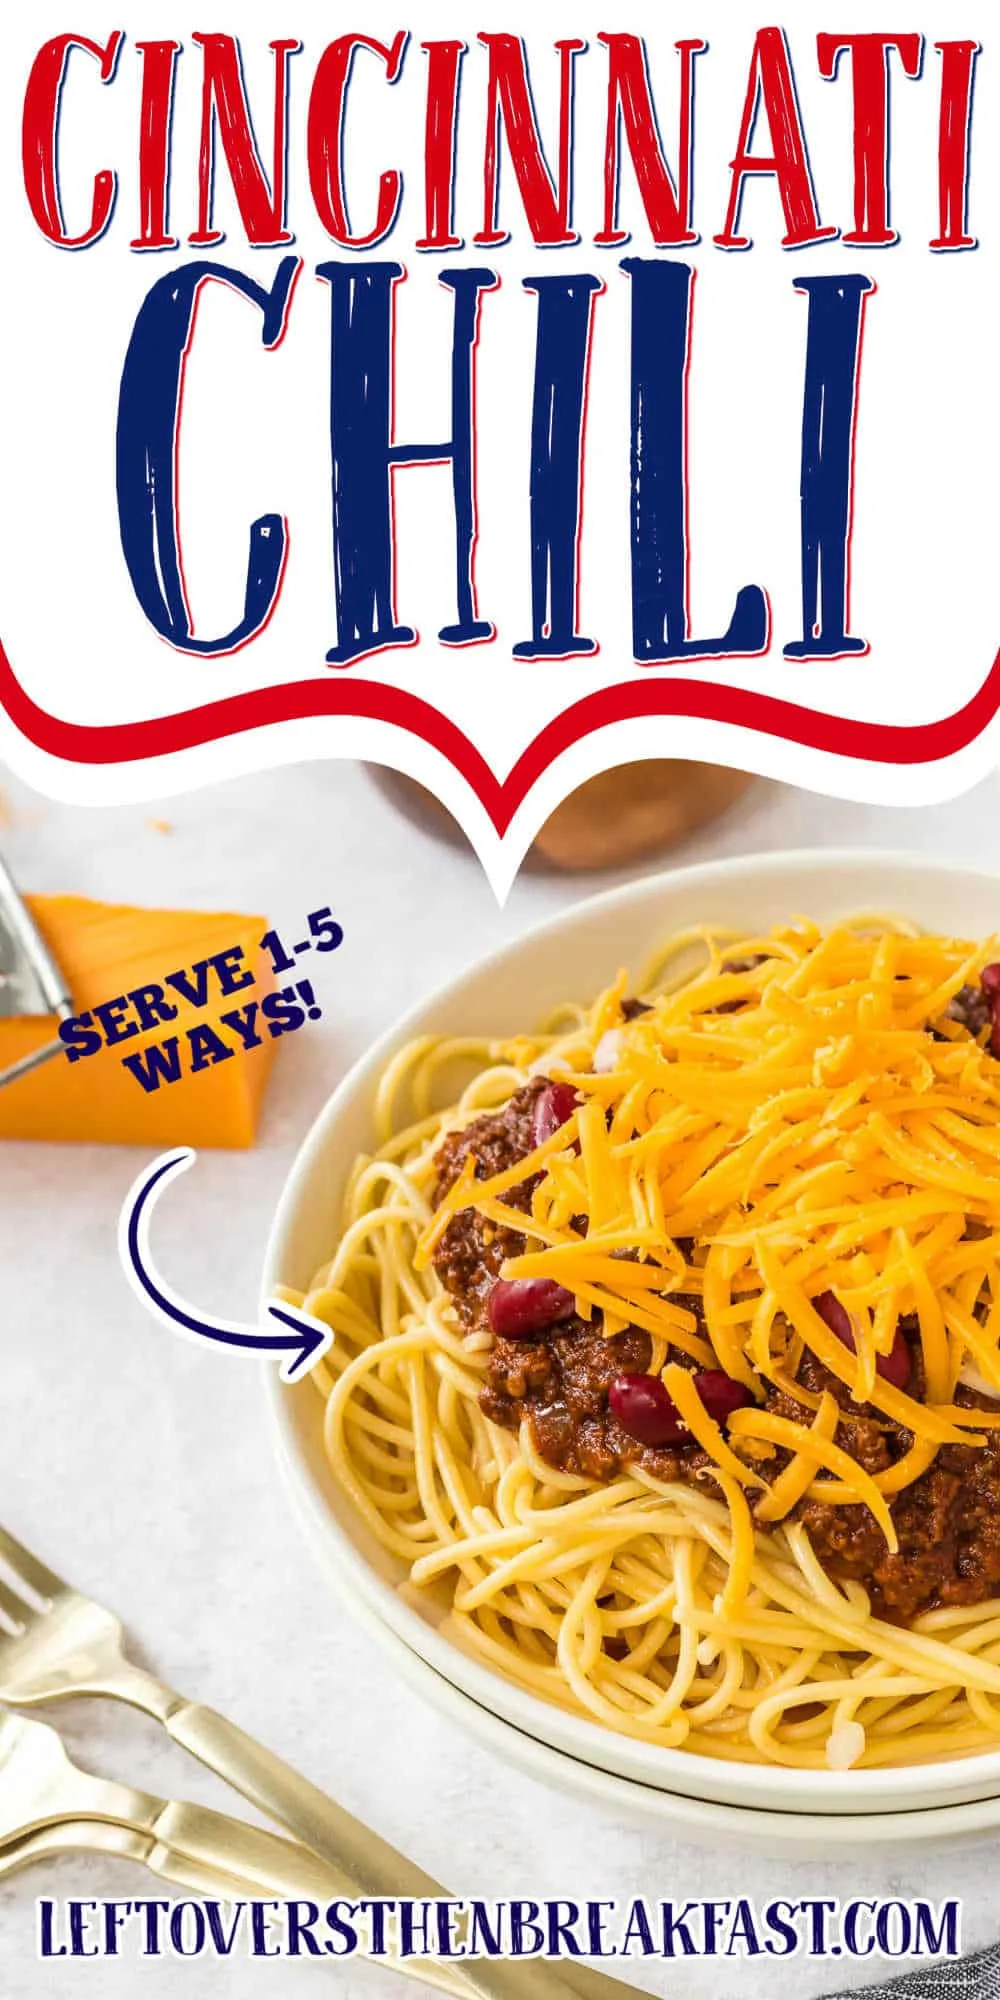 bowl of spaghetti and cheese with text "cincinnati chili"